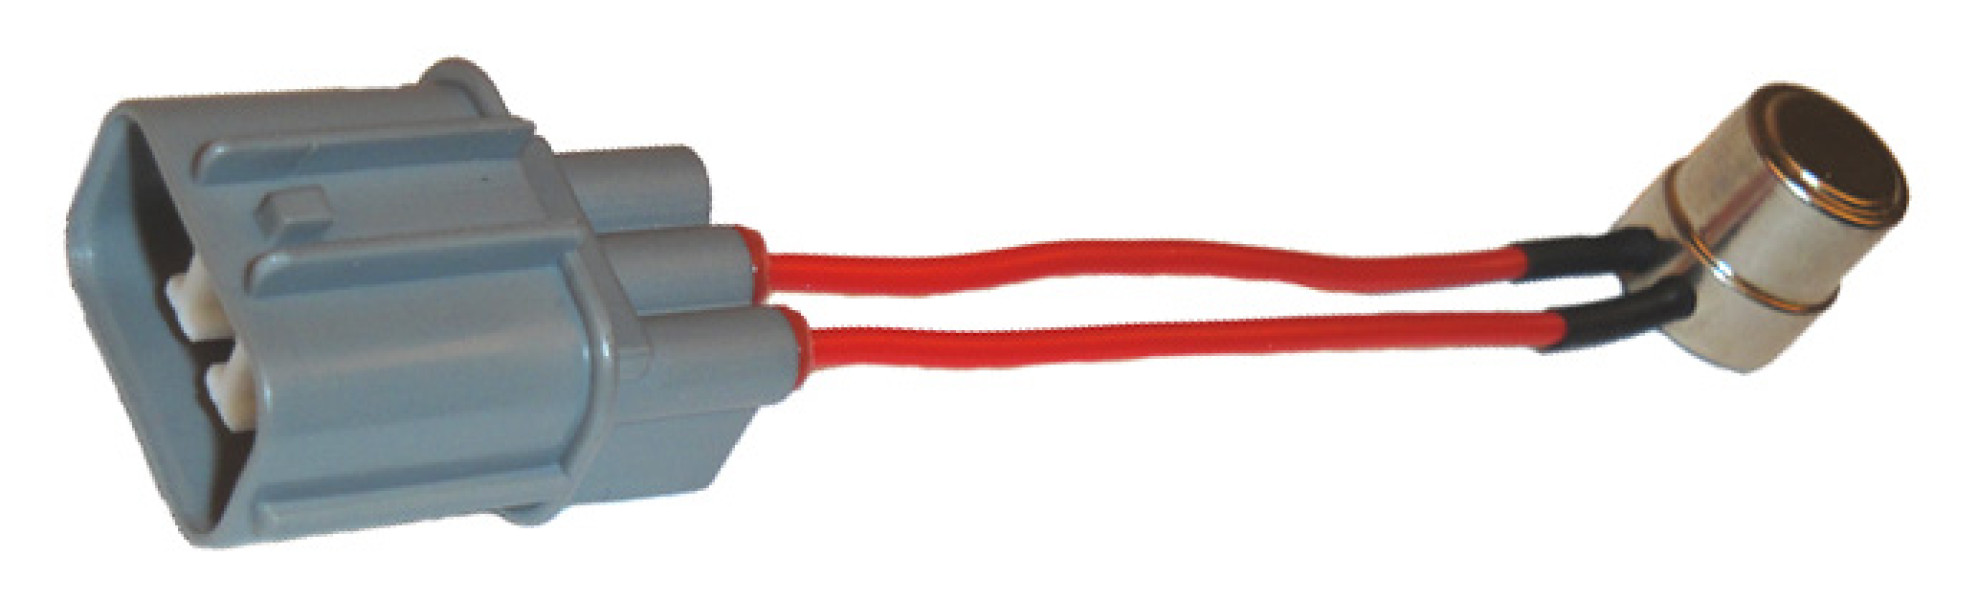 Image of HVAC System Switch from Sunair. Part number: MC-1350